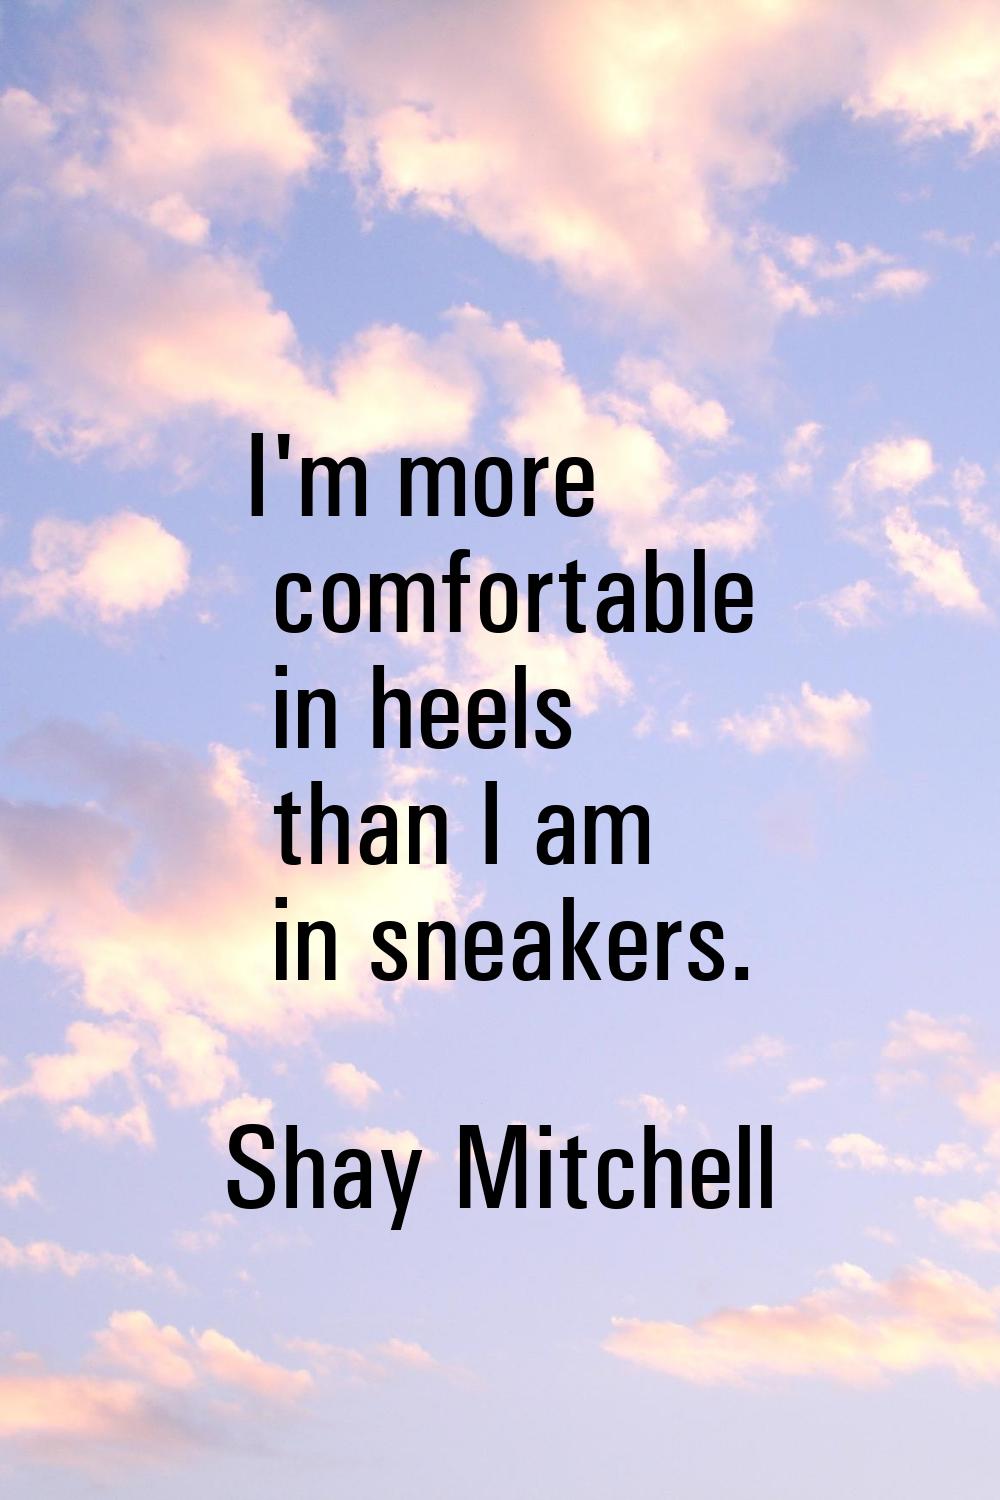 I'm more comfortable in heels than I am in sneakers.